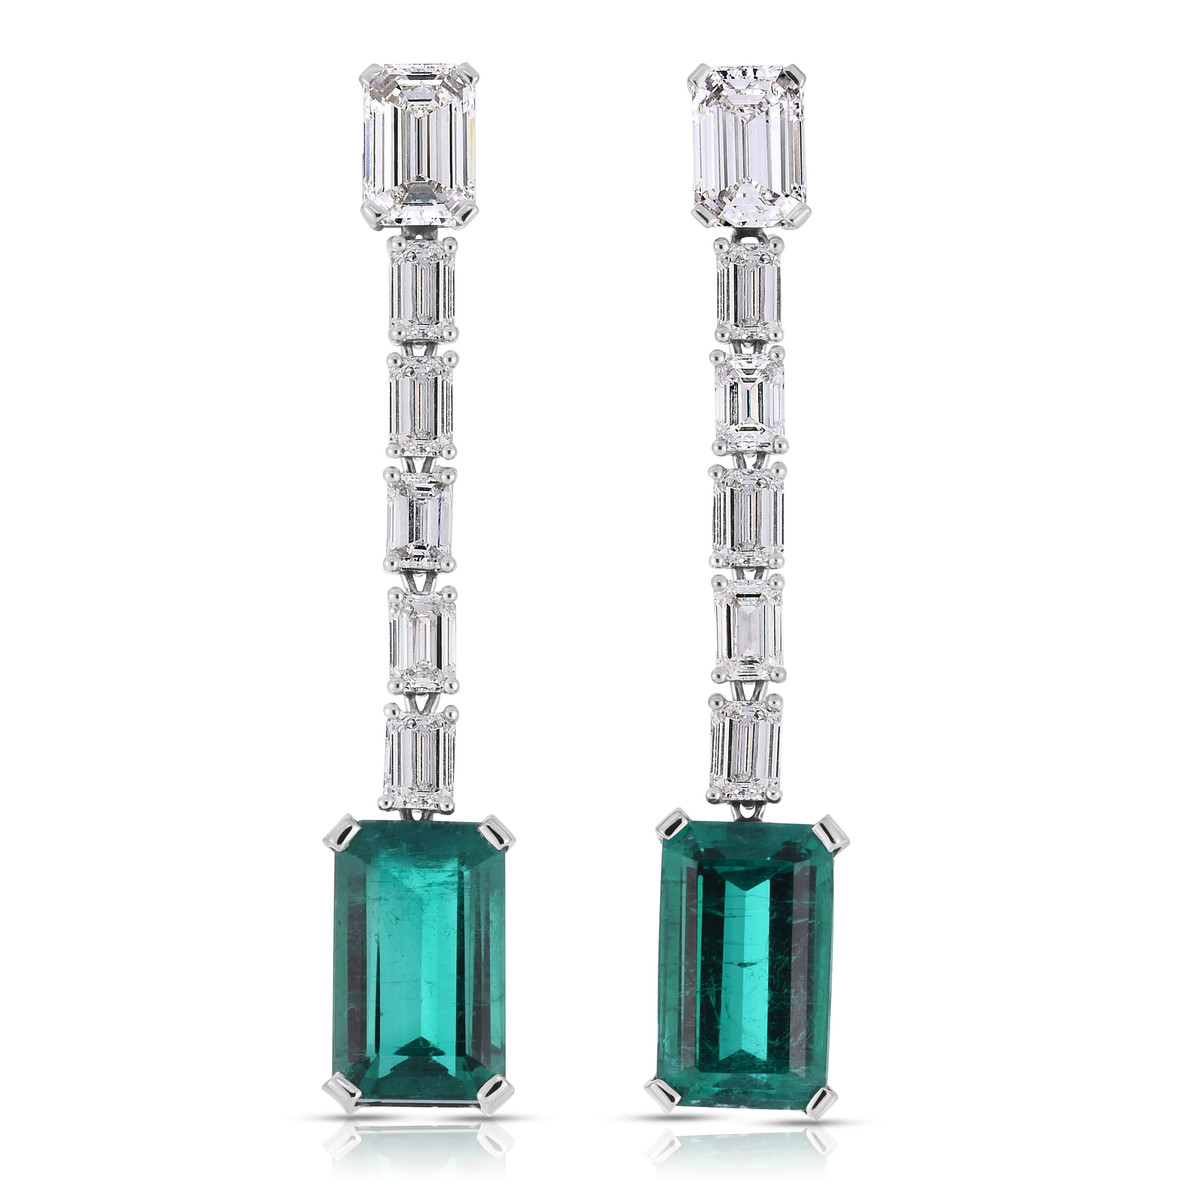 Hyde Park Collection Platinum Emerald & Diamond Earrings-54458 Product Image